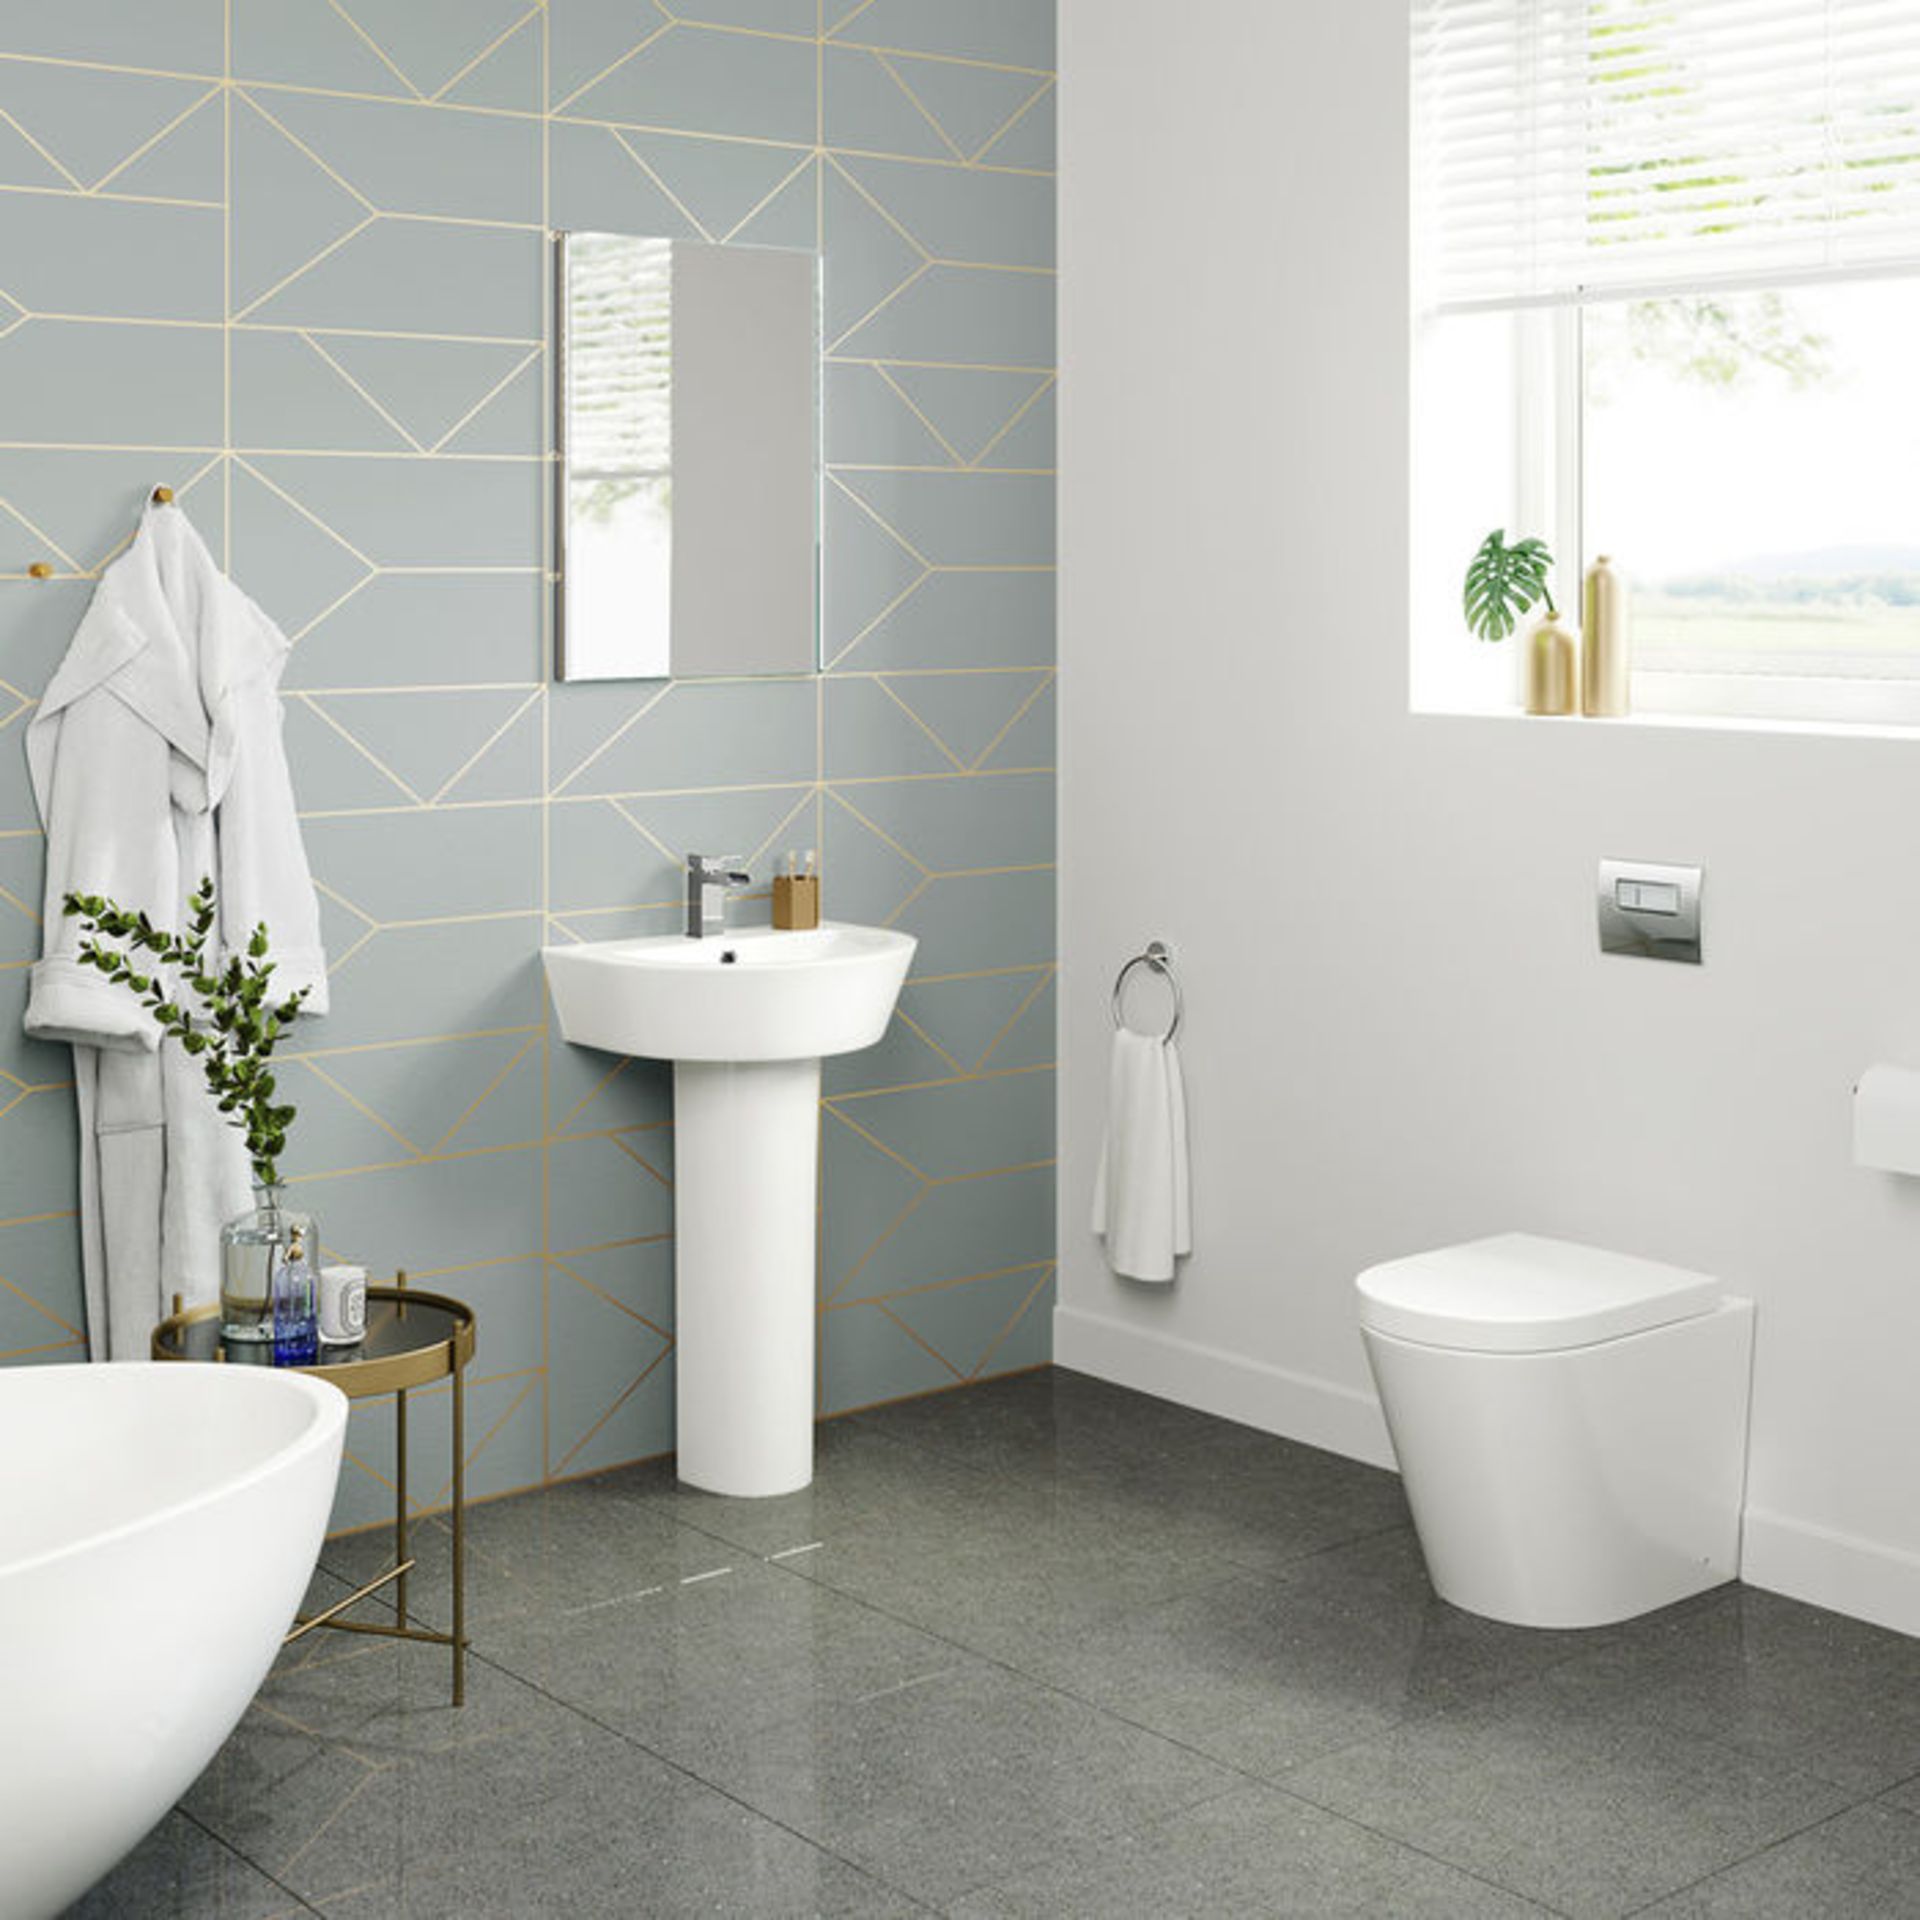 (P251) Lyon Back to Wall Toilet inc Luxury Soft Close Seat. Our Lyon back to wall toilet is made - Image 2 of 4